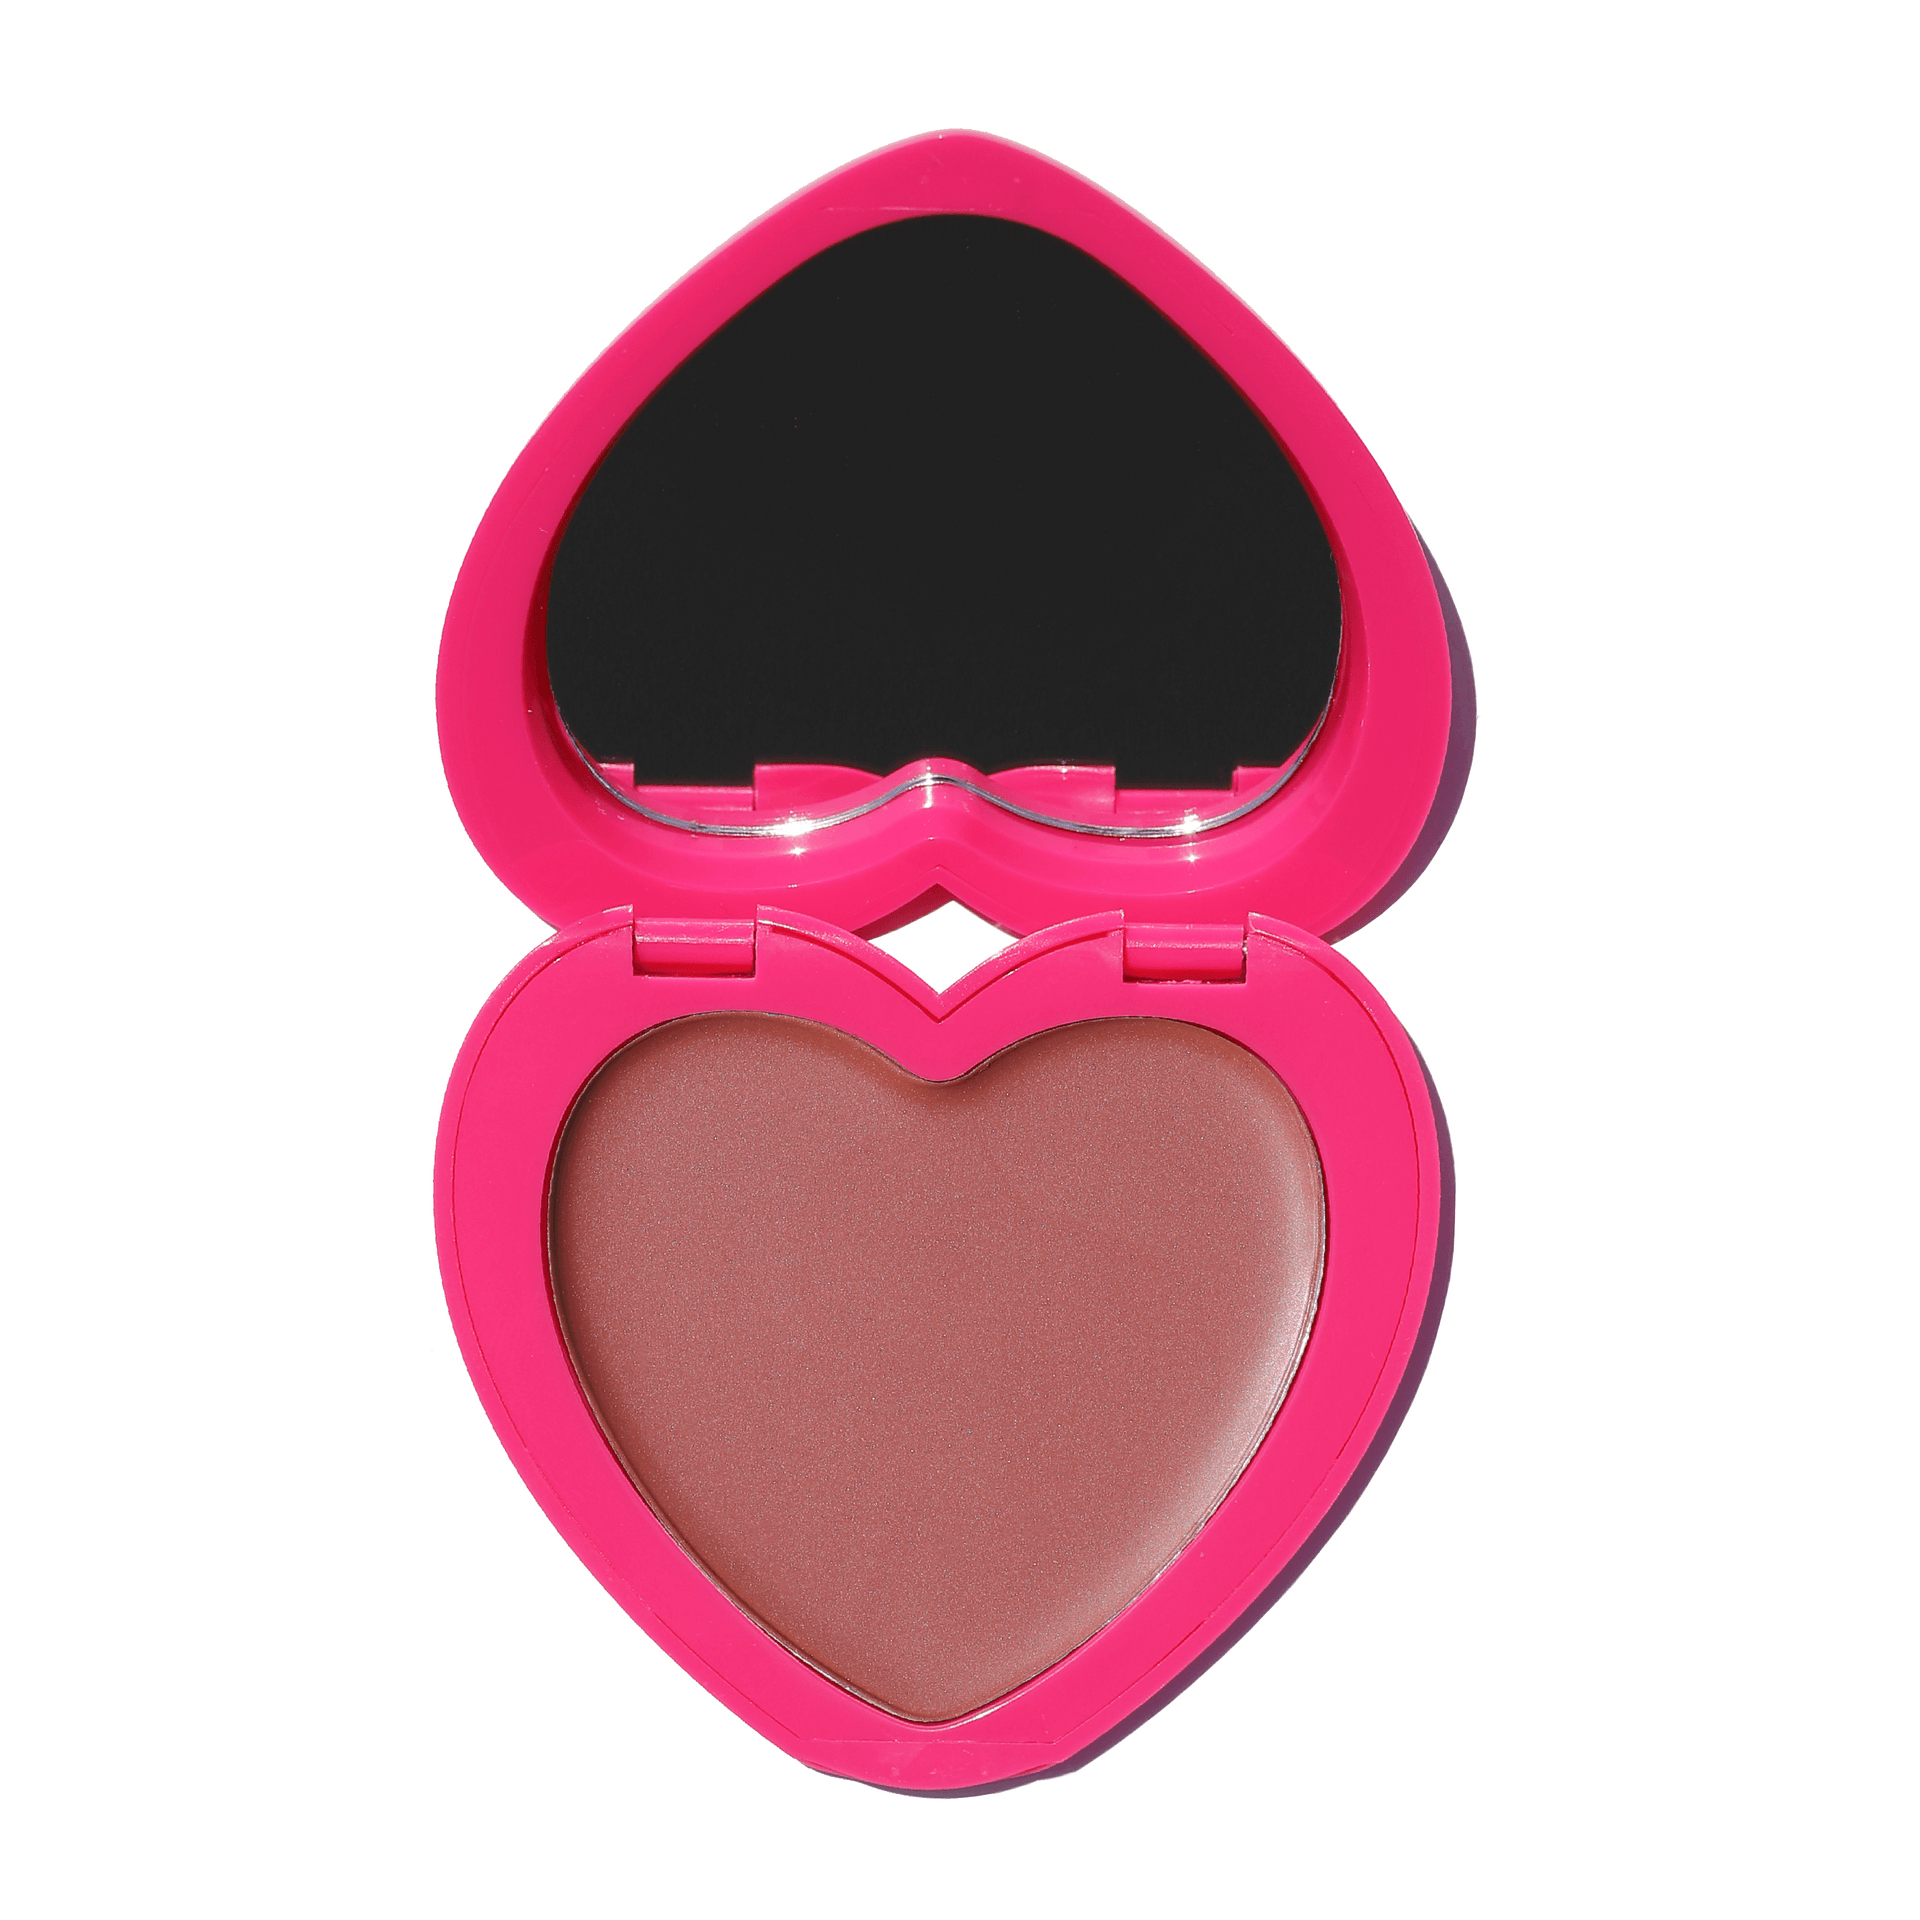 Heart-shaped Candy Paint Cheek + Lip Tint compact in a vibrant shade, featuring a creamy texture and radiant dewy finish for skin-enhancing beauty.